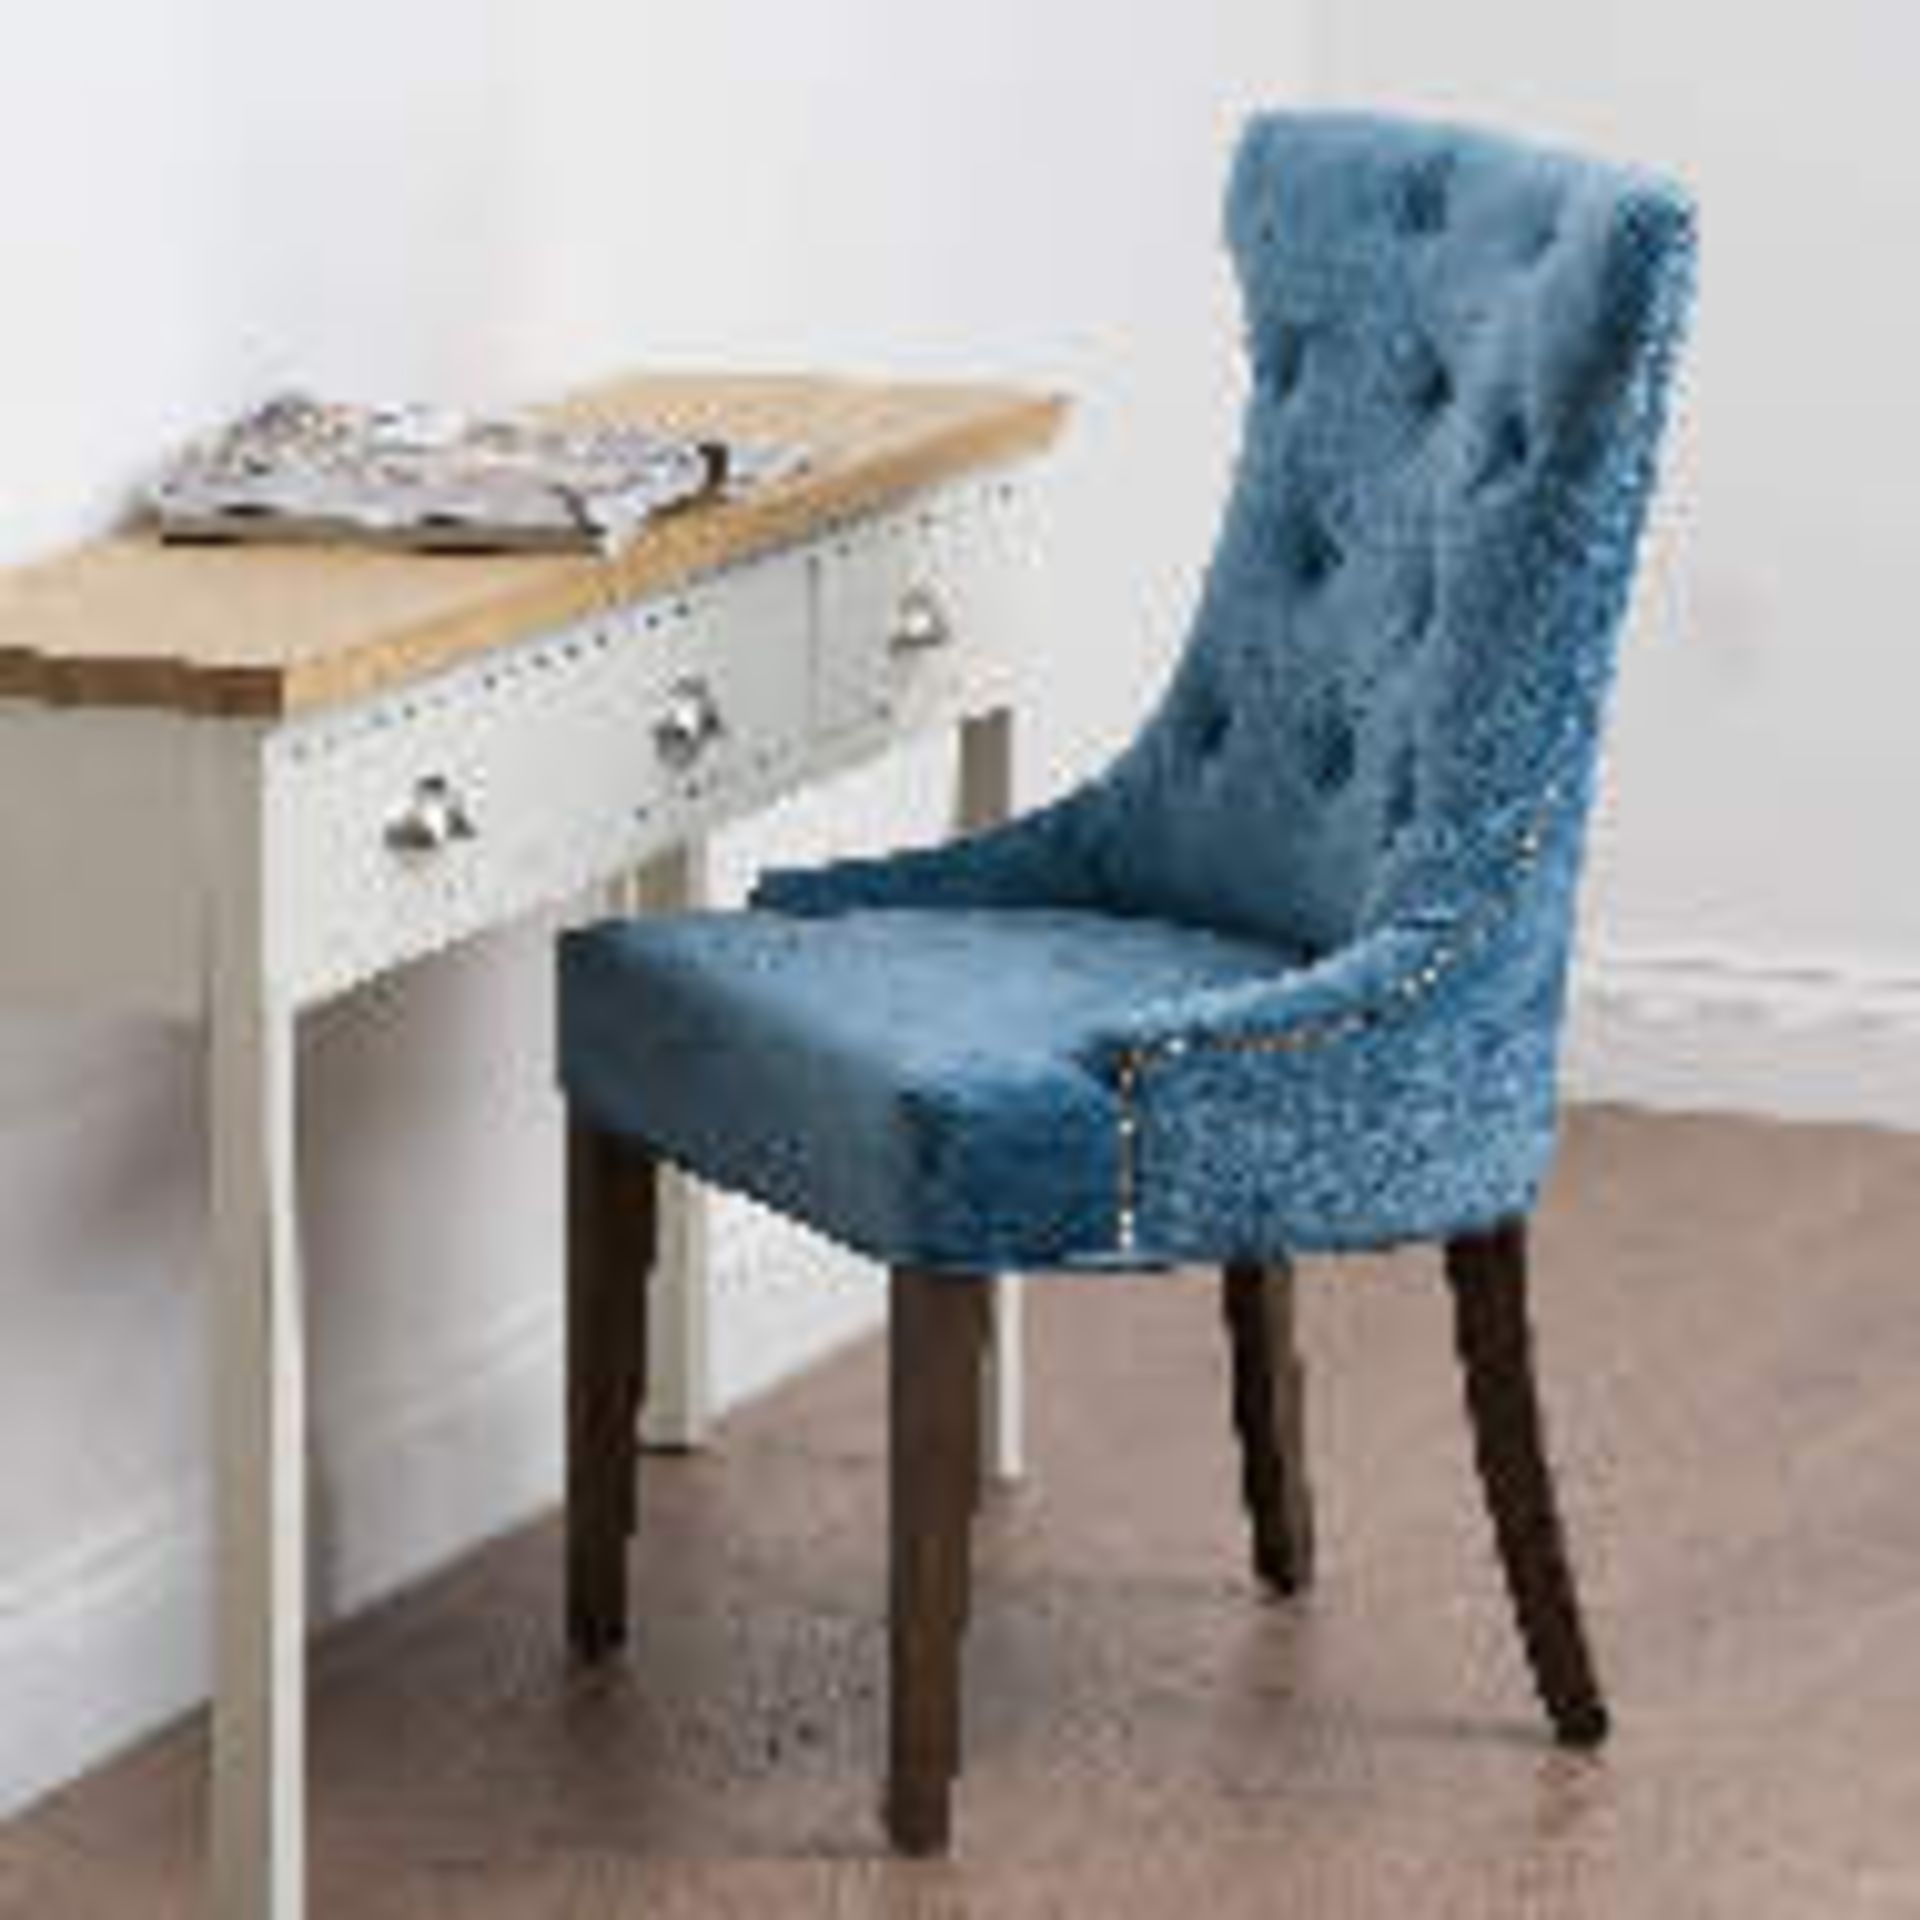 A Pair Of Teal Wing Chair Button Pressed Cocktail Chairs, Made In A Chenille Material And Finished